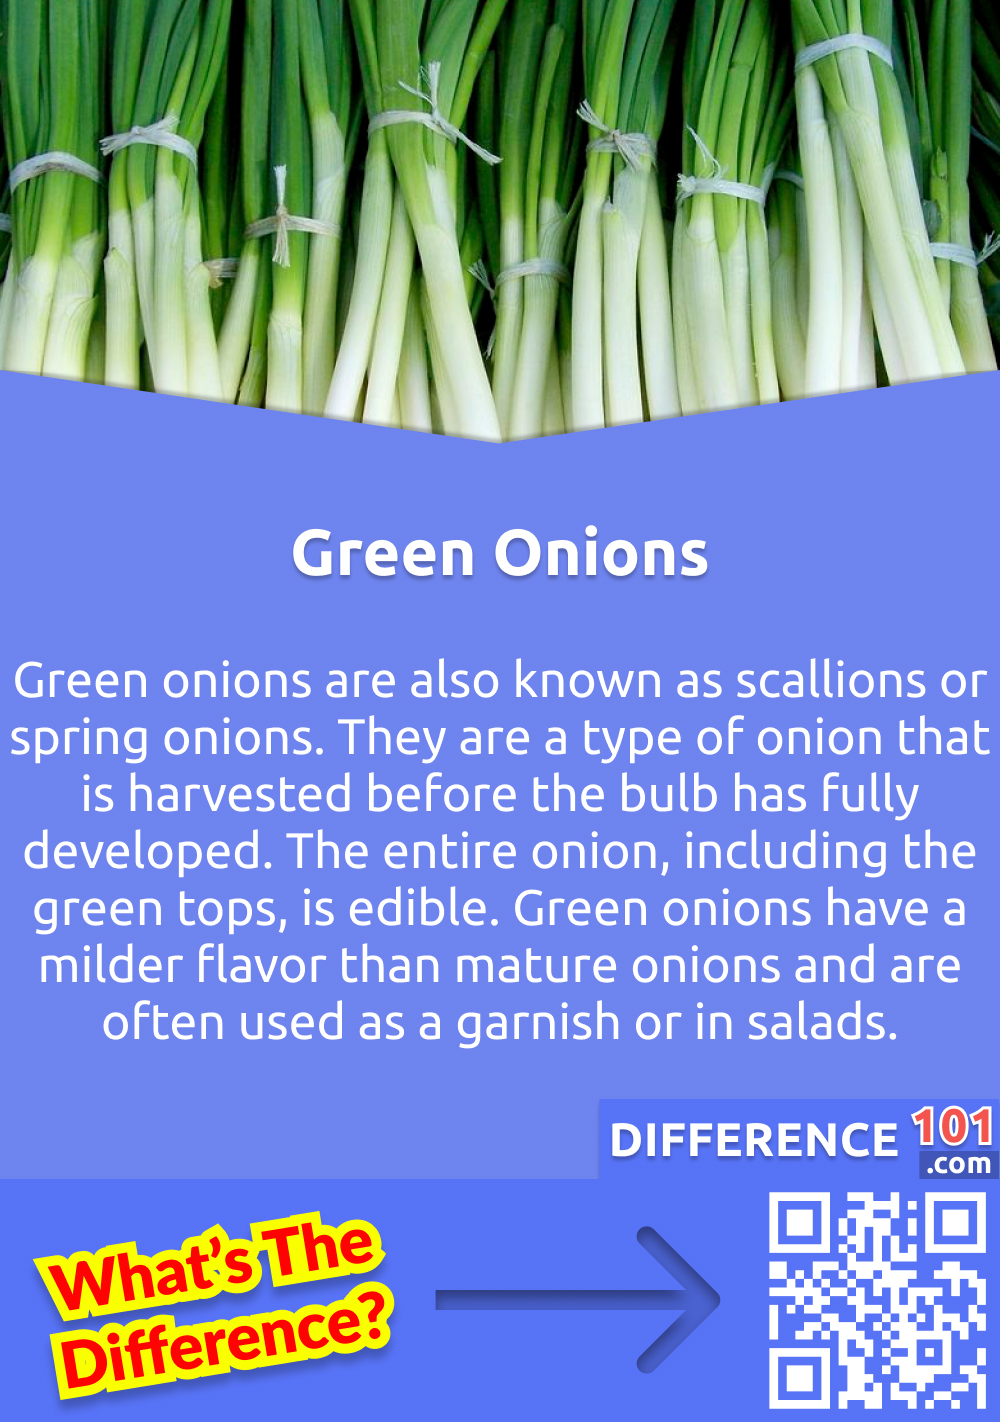 What Is Green Onions? Green onions are also known as scallions or spring onions. They are a type of onion that is harvested before the bulb has fully developed. The entire onion, including the green tops, is edible. Green onions have a milder flavor than mature onions and are often used as a garnish or in salads.
